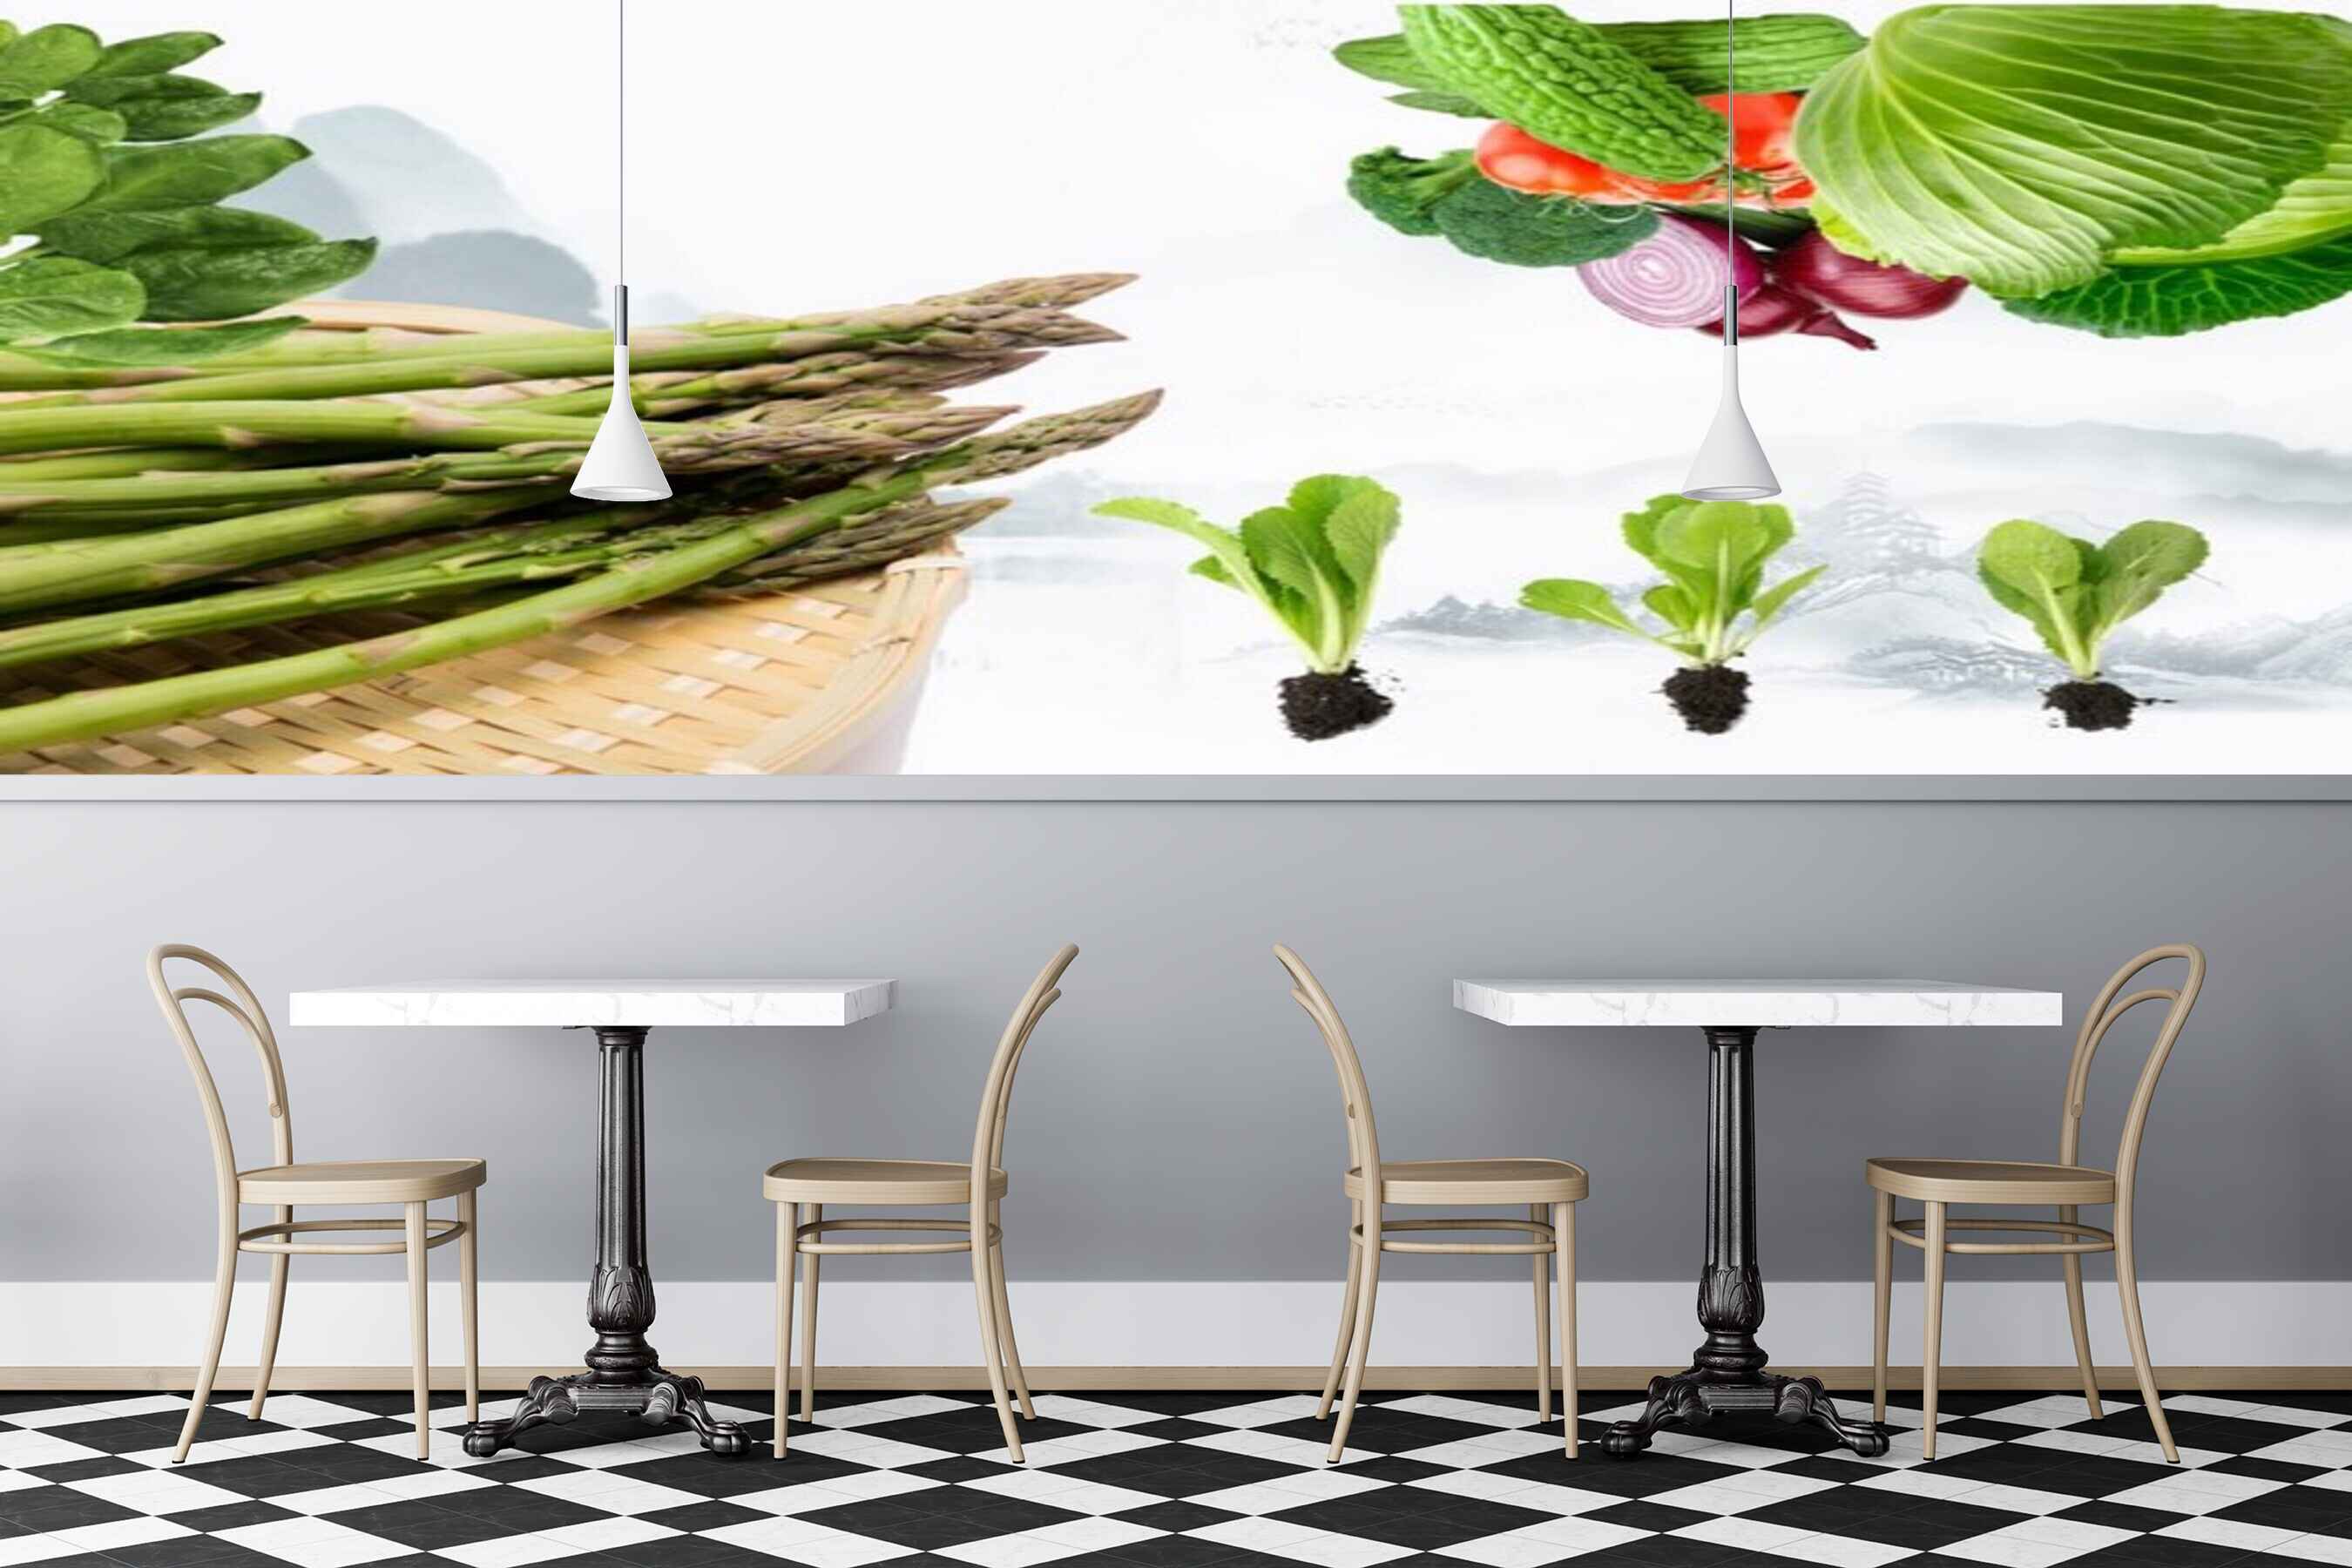 Avikalp MWZ3155 Lettuces Herbs Cabbage Onions HD Wallpaper for Cafe Restaurant